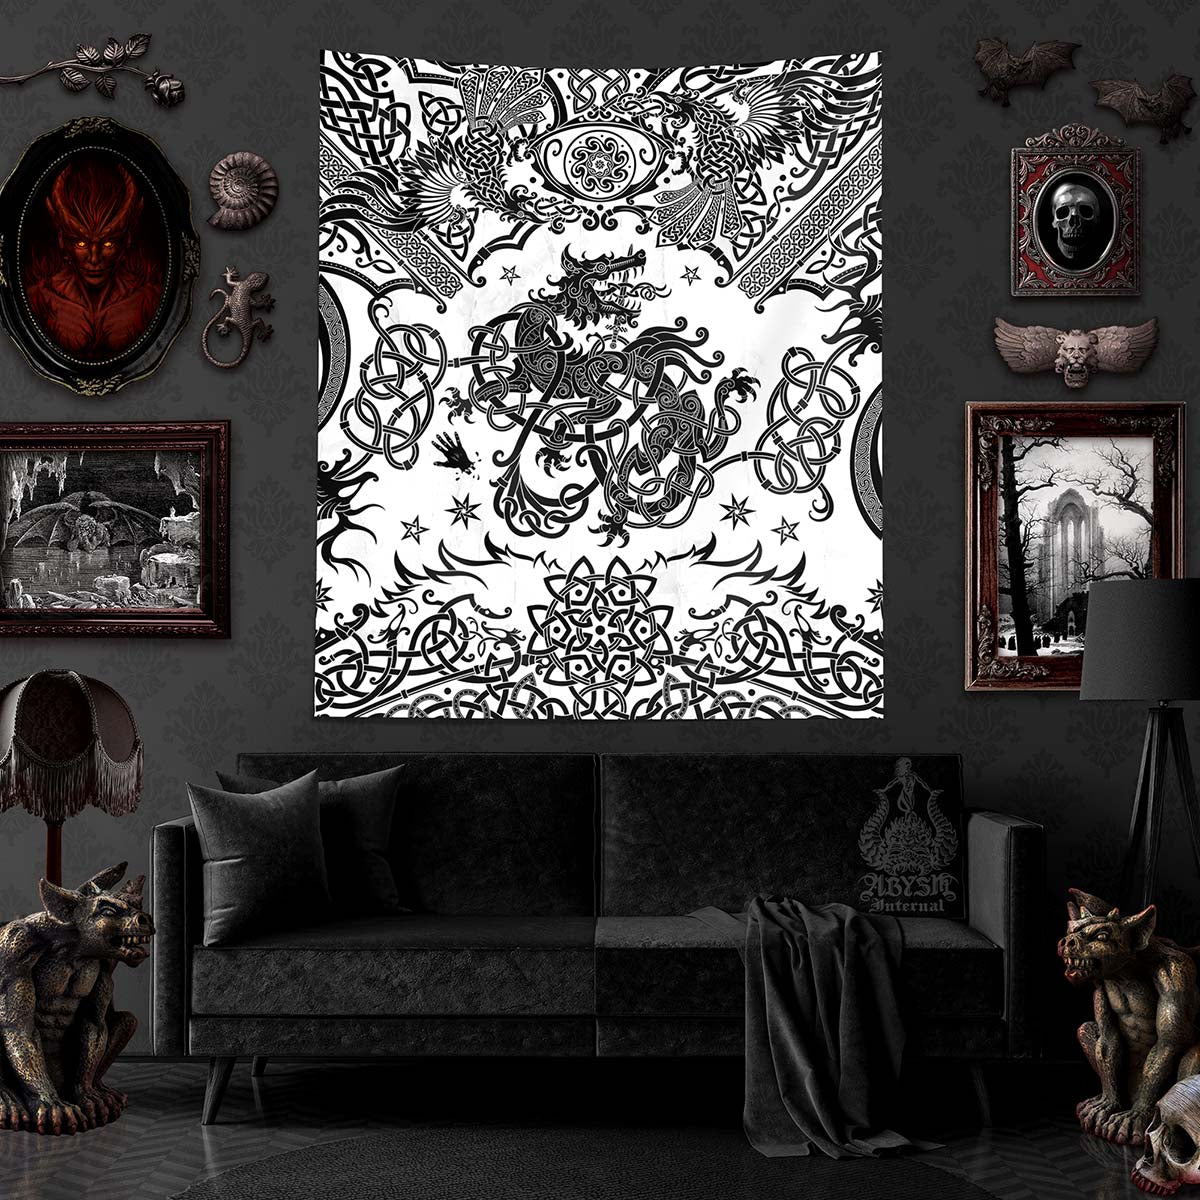 Gothic Tapestries - Art Prints, Decor and Gifts, Viking Knotwork Art, Norse Wolf Fenrir - Abysm Internal